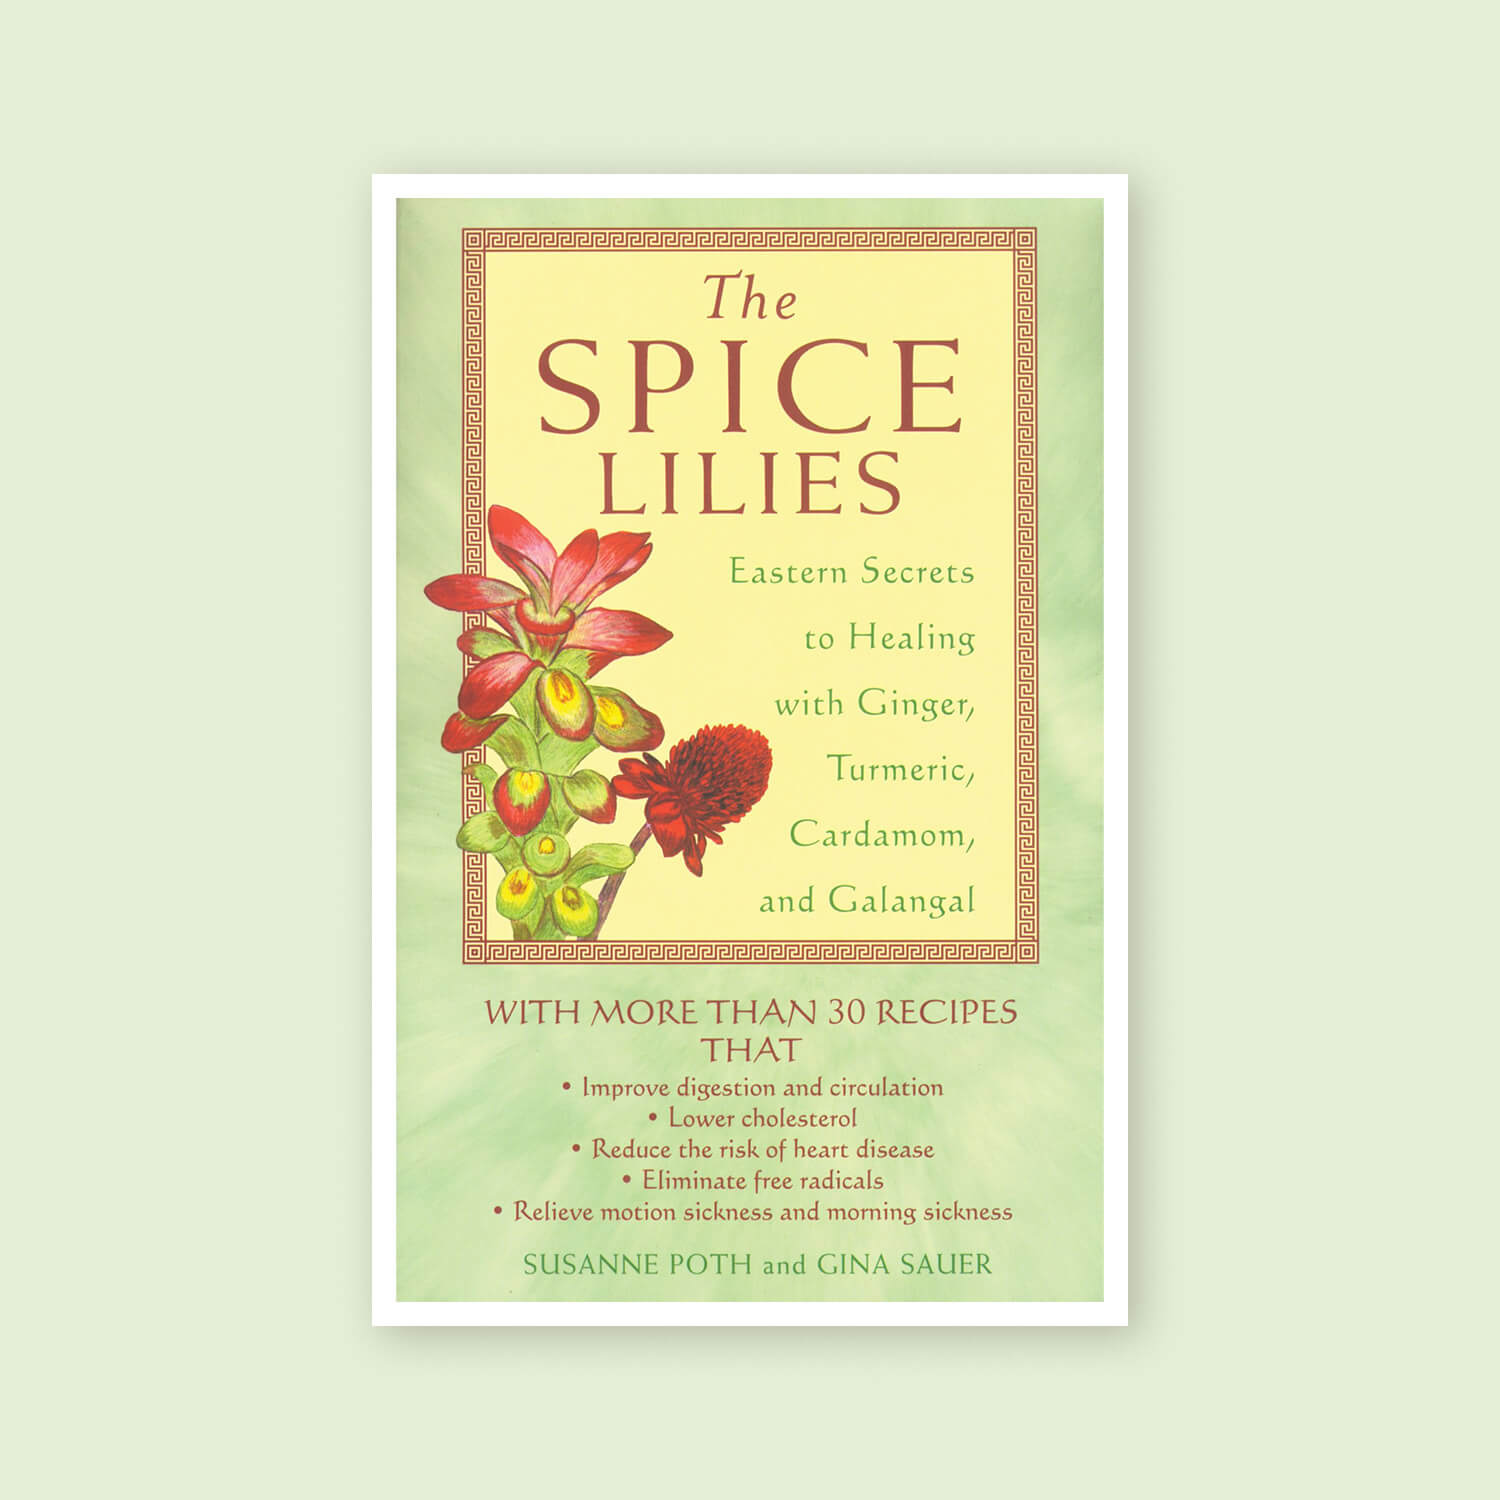 The Spice Lilies